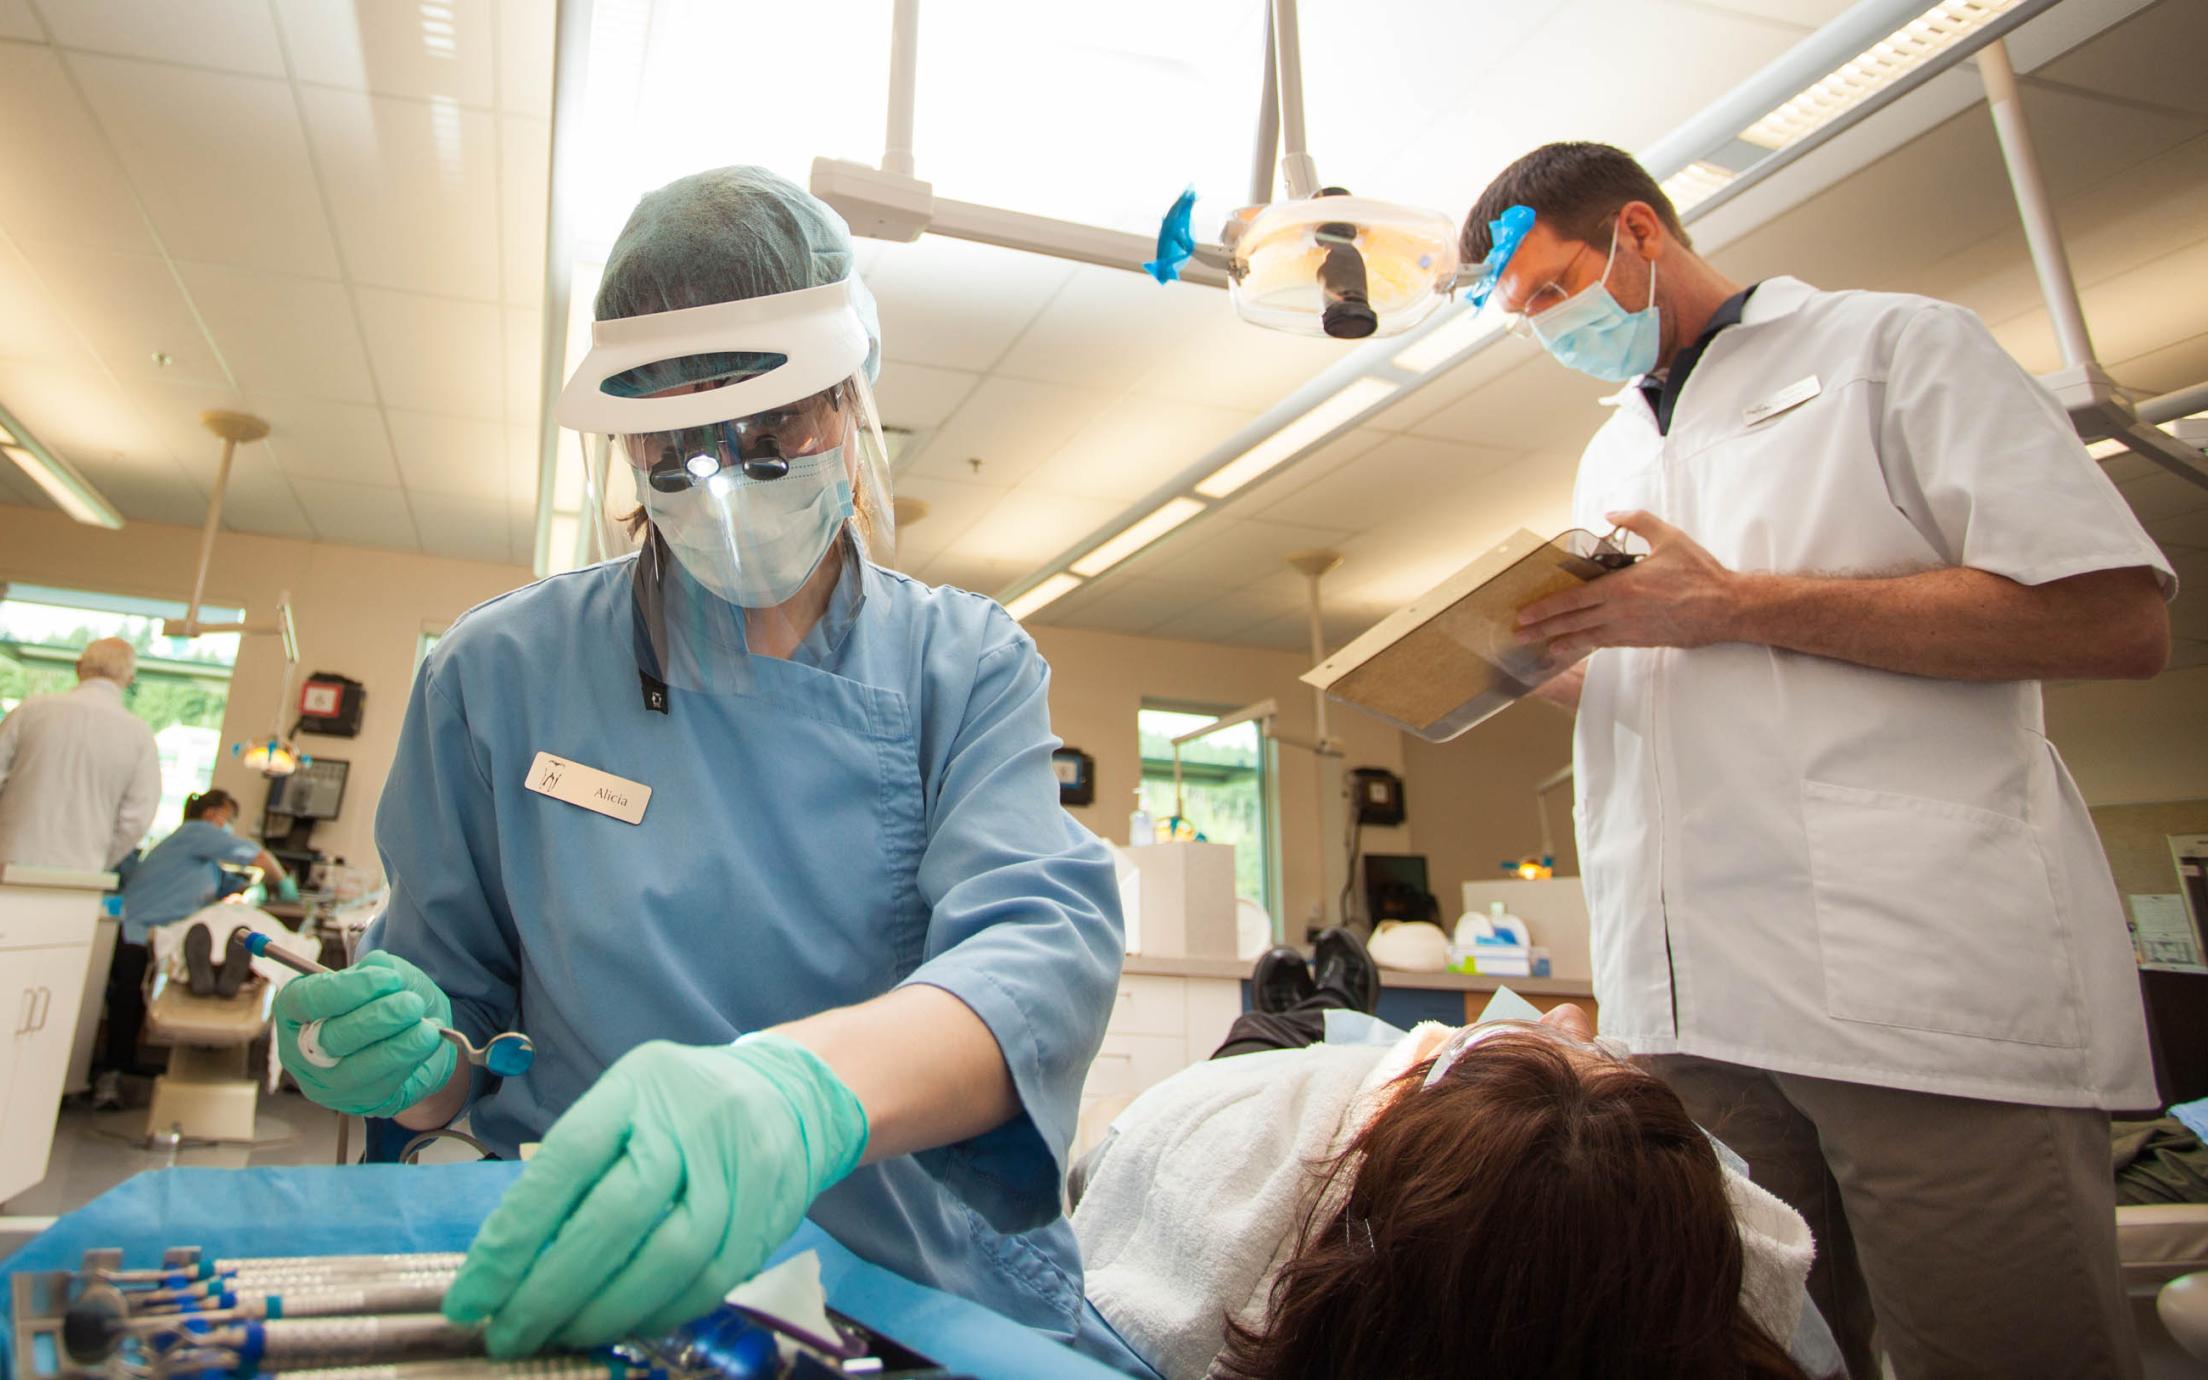 Looking for dental hygiene schools in BC? This Dental Hygienist found her path at VIU